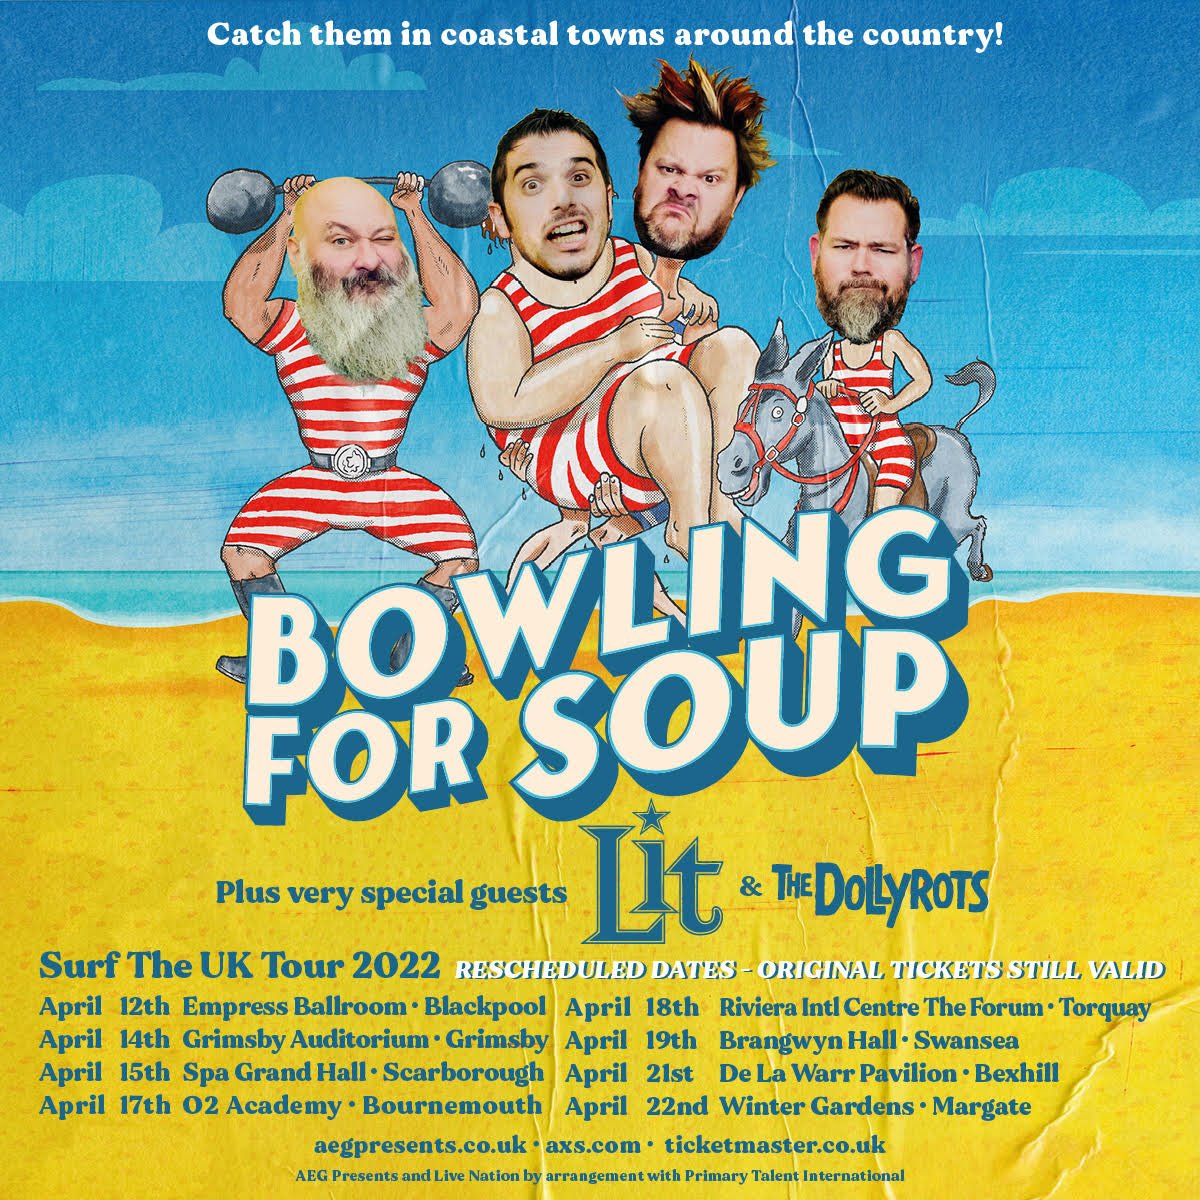 Bowling FOr Soup Reschedule Their Coastal Town Tour Of The UK To 2022 ...